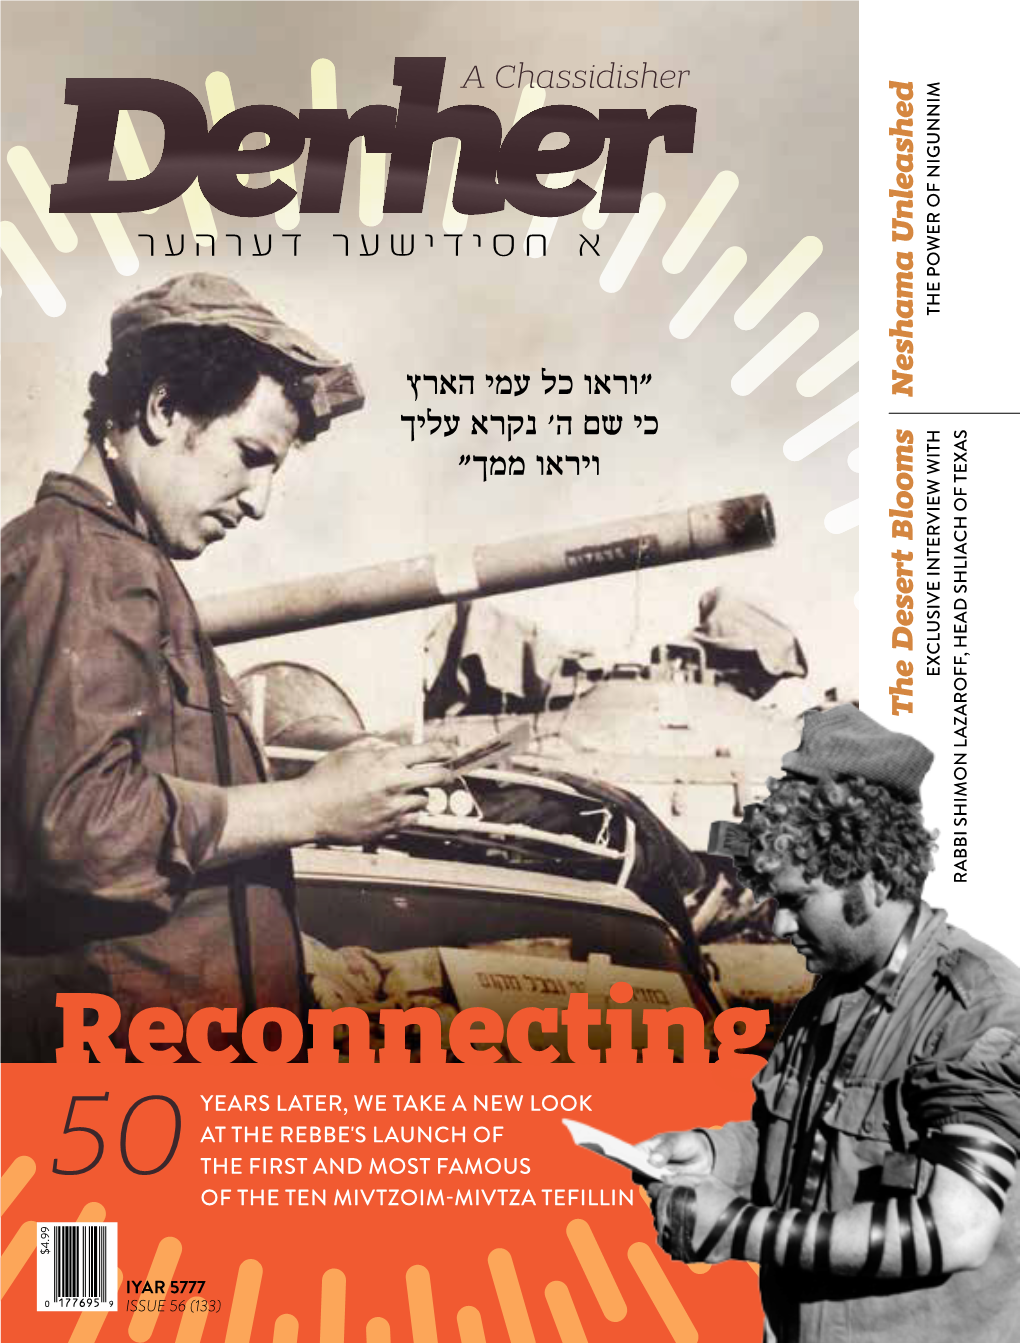 Reconnecting YEARS LATER, WE TAKE a NEW LOOK at the REBBE's LAUNCH of 50 the FIRST and MOST FAMOUS of the TEN MIVTZOIM-MIVTZA TEFILLIN $4.99